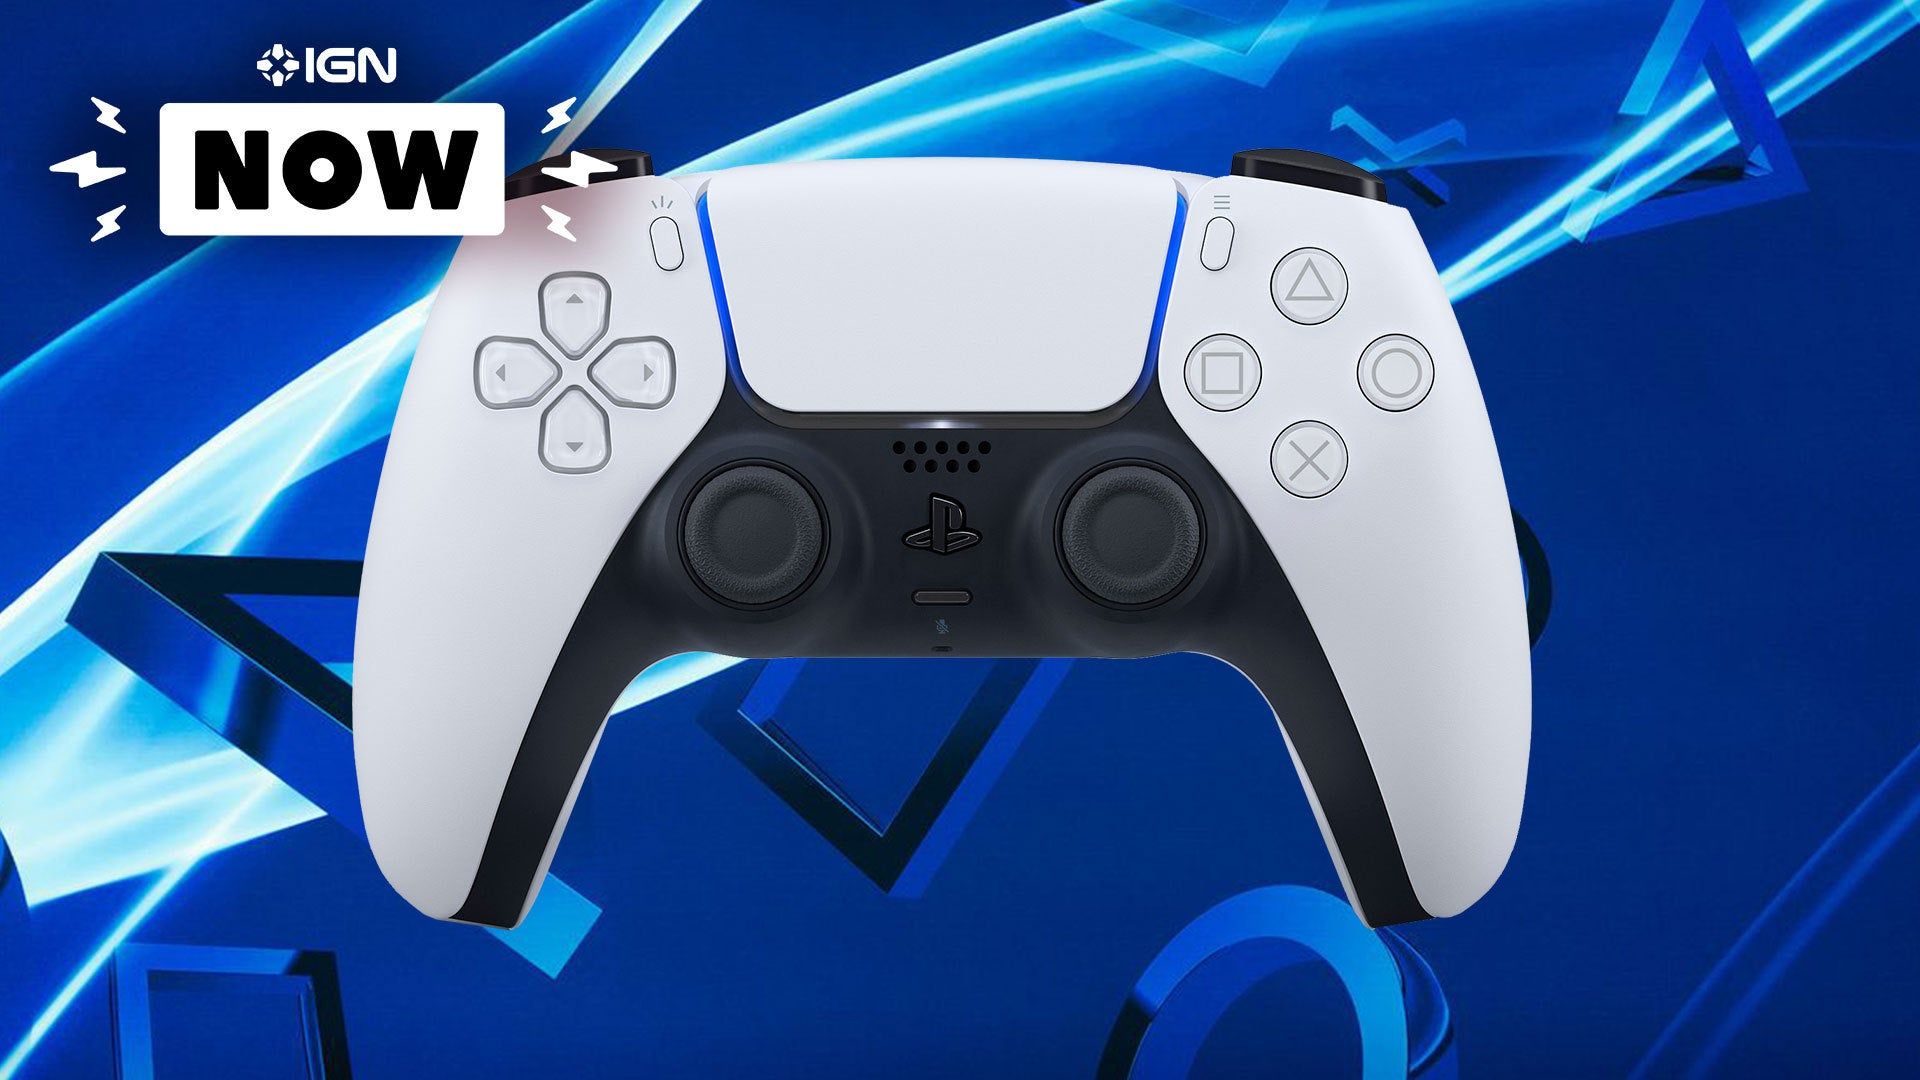 PS5's Controller, the DualSense, Revealed